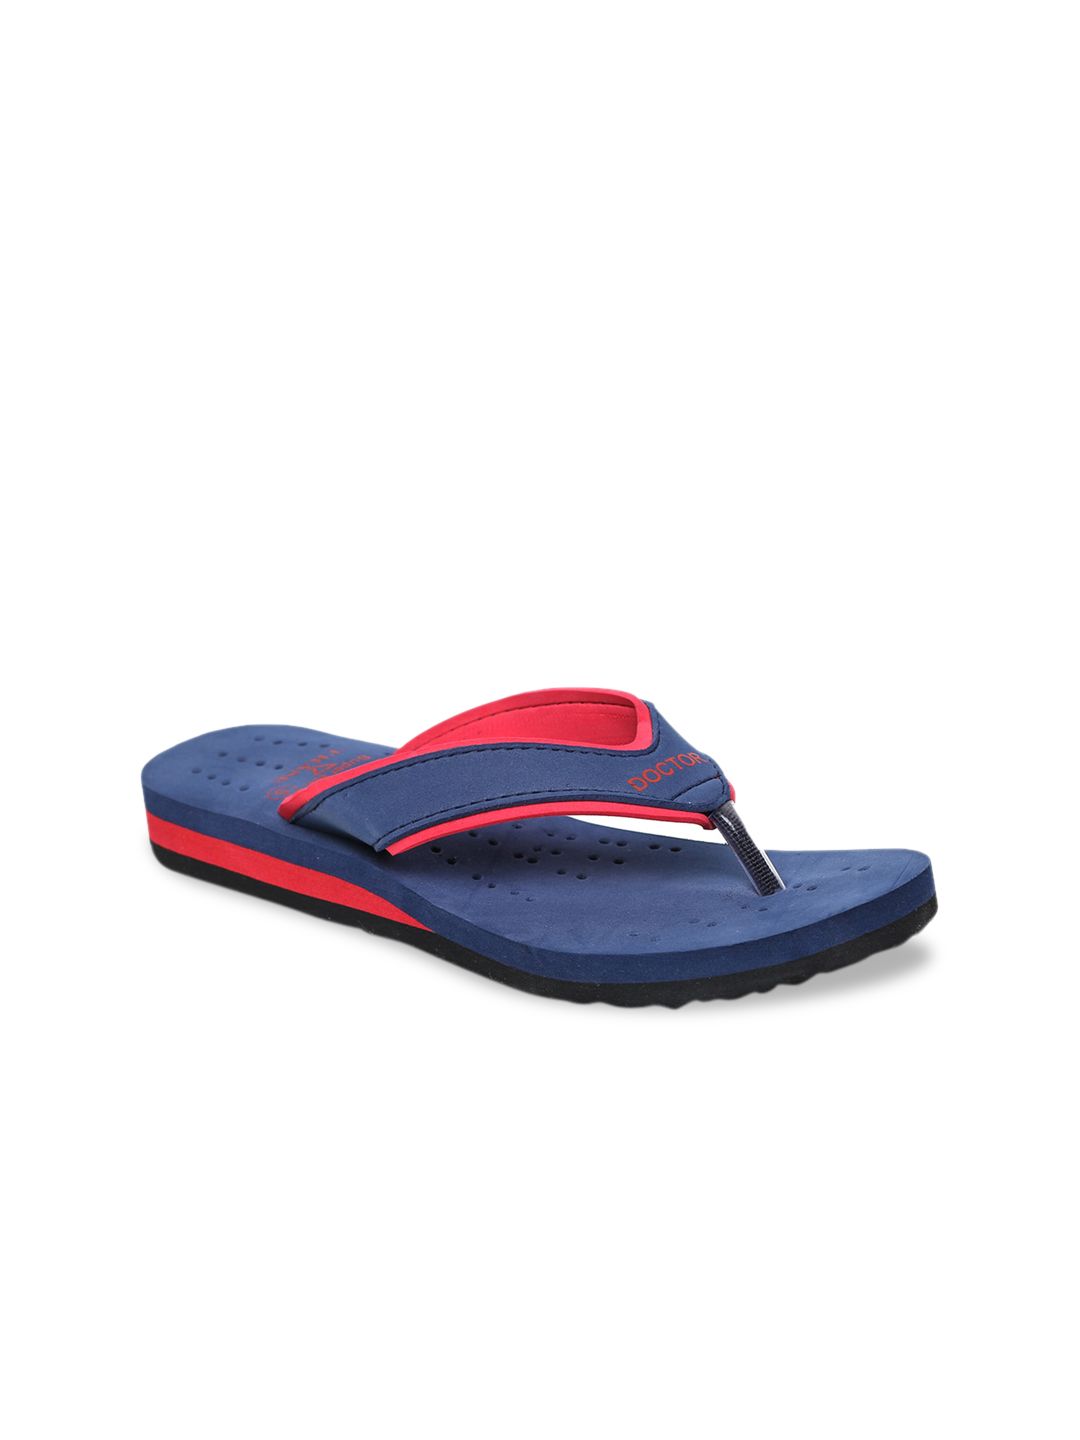 TRASE Women Blue & Red Colourblocked Thong Flip-Flops Price in India